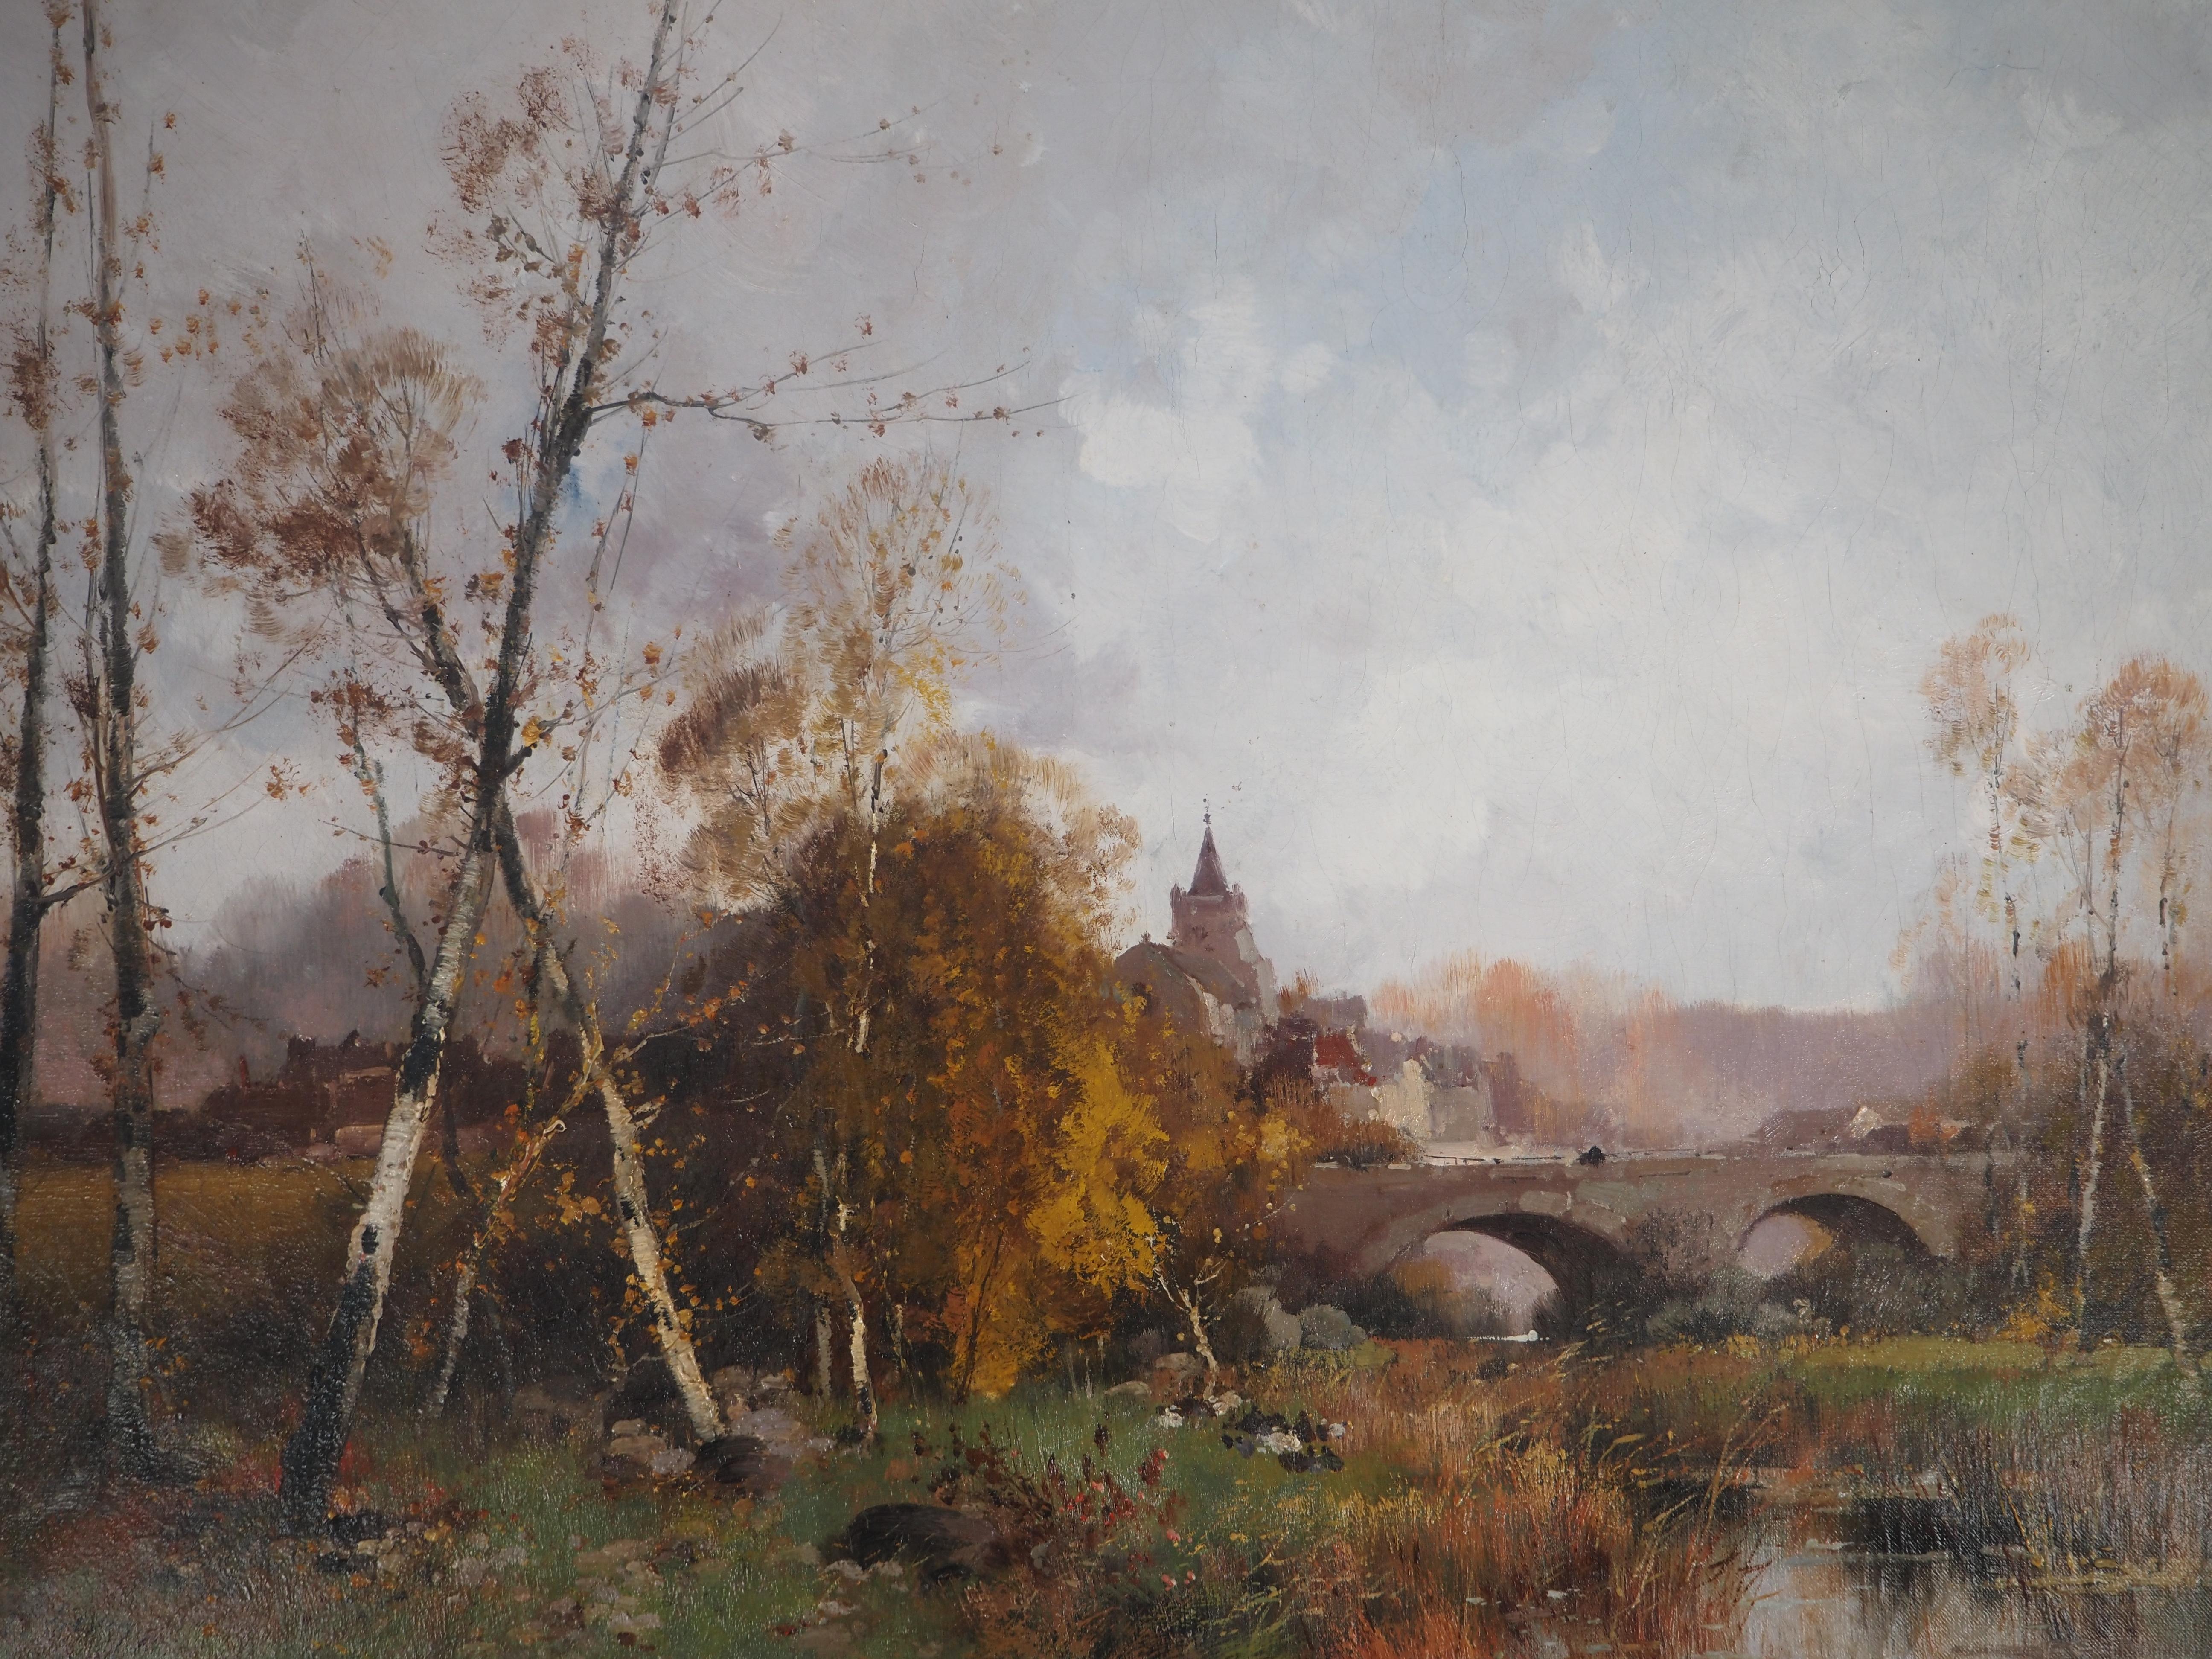 Normandy, Bridge Near a Village - Original painting on canvas - Signed - Painting by Eugene Galien-Laloue